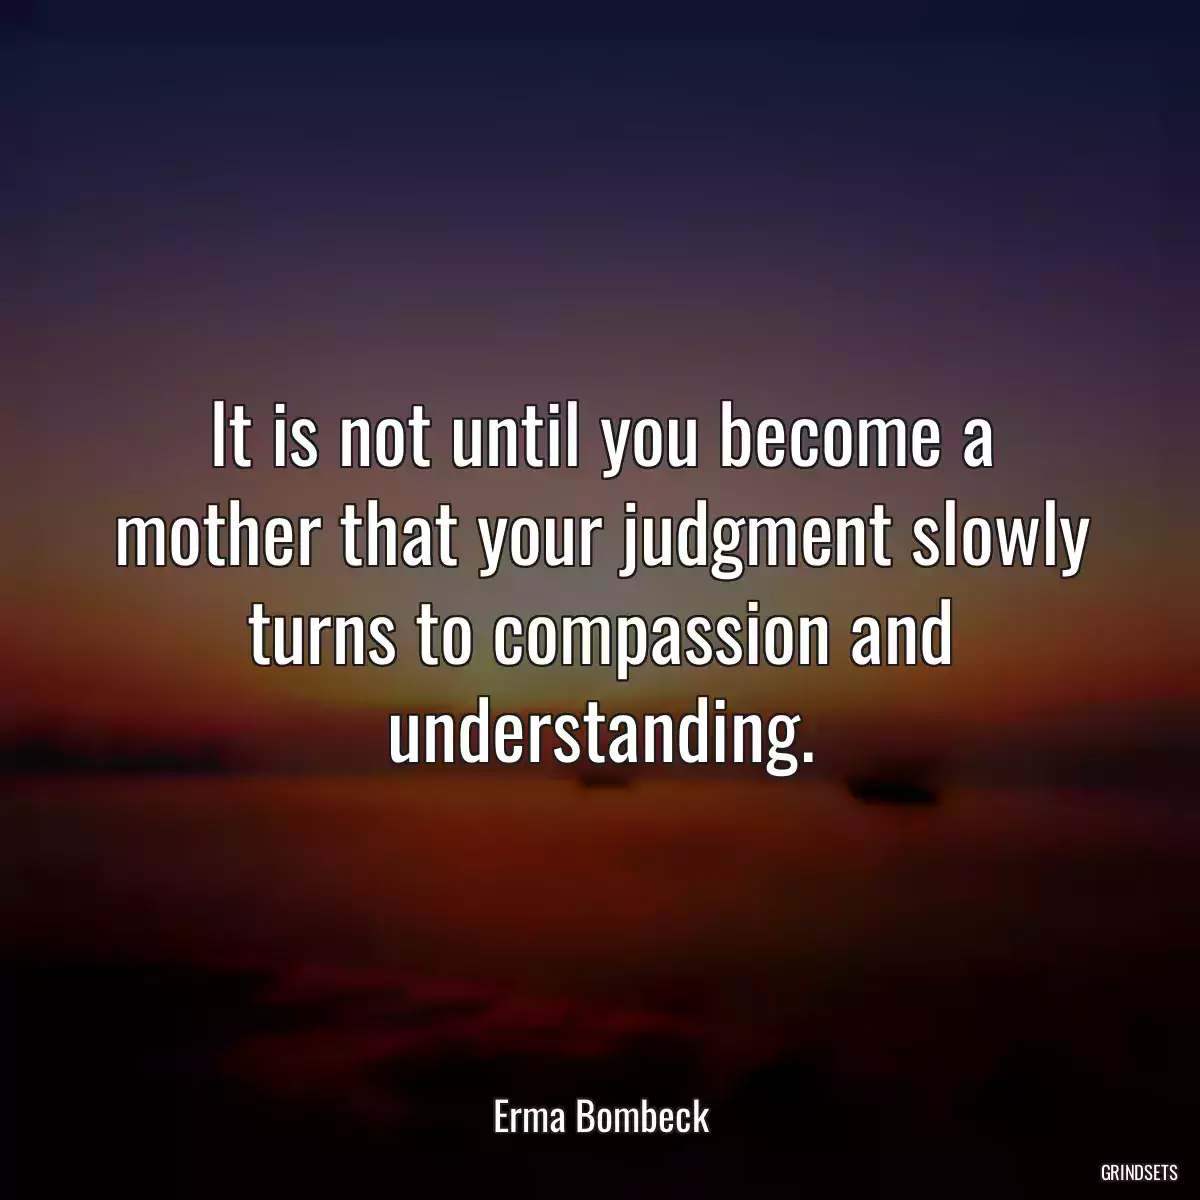 It is not until you become a mother that your judgment slowly turns to compassion and understanding.